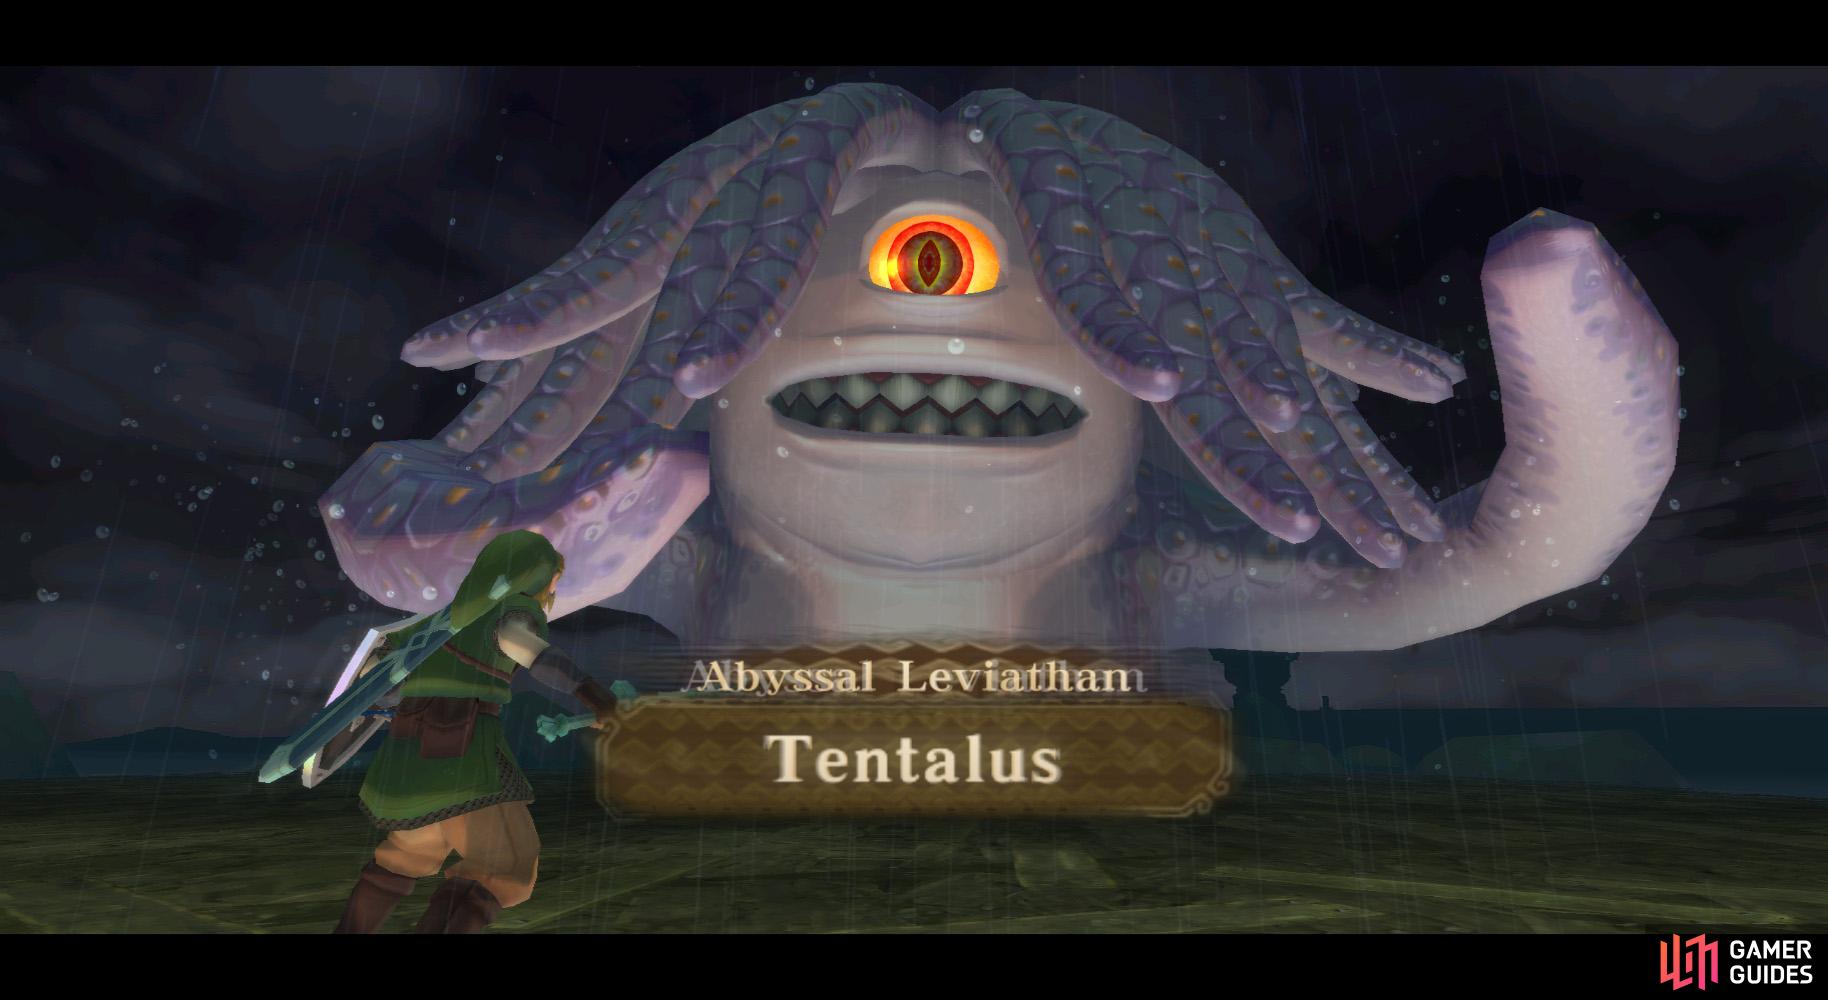 Tentalus may look like a monster from a cartoon, but it can put up a good fight.